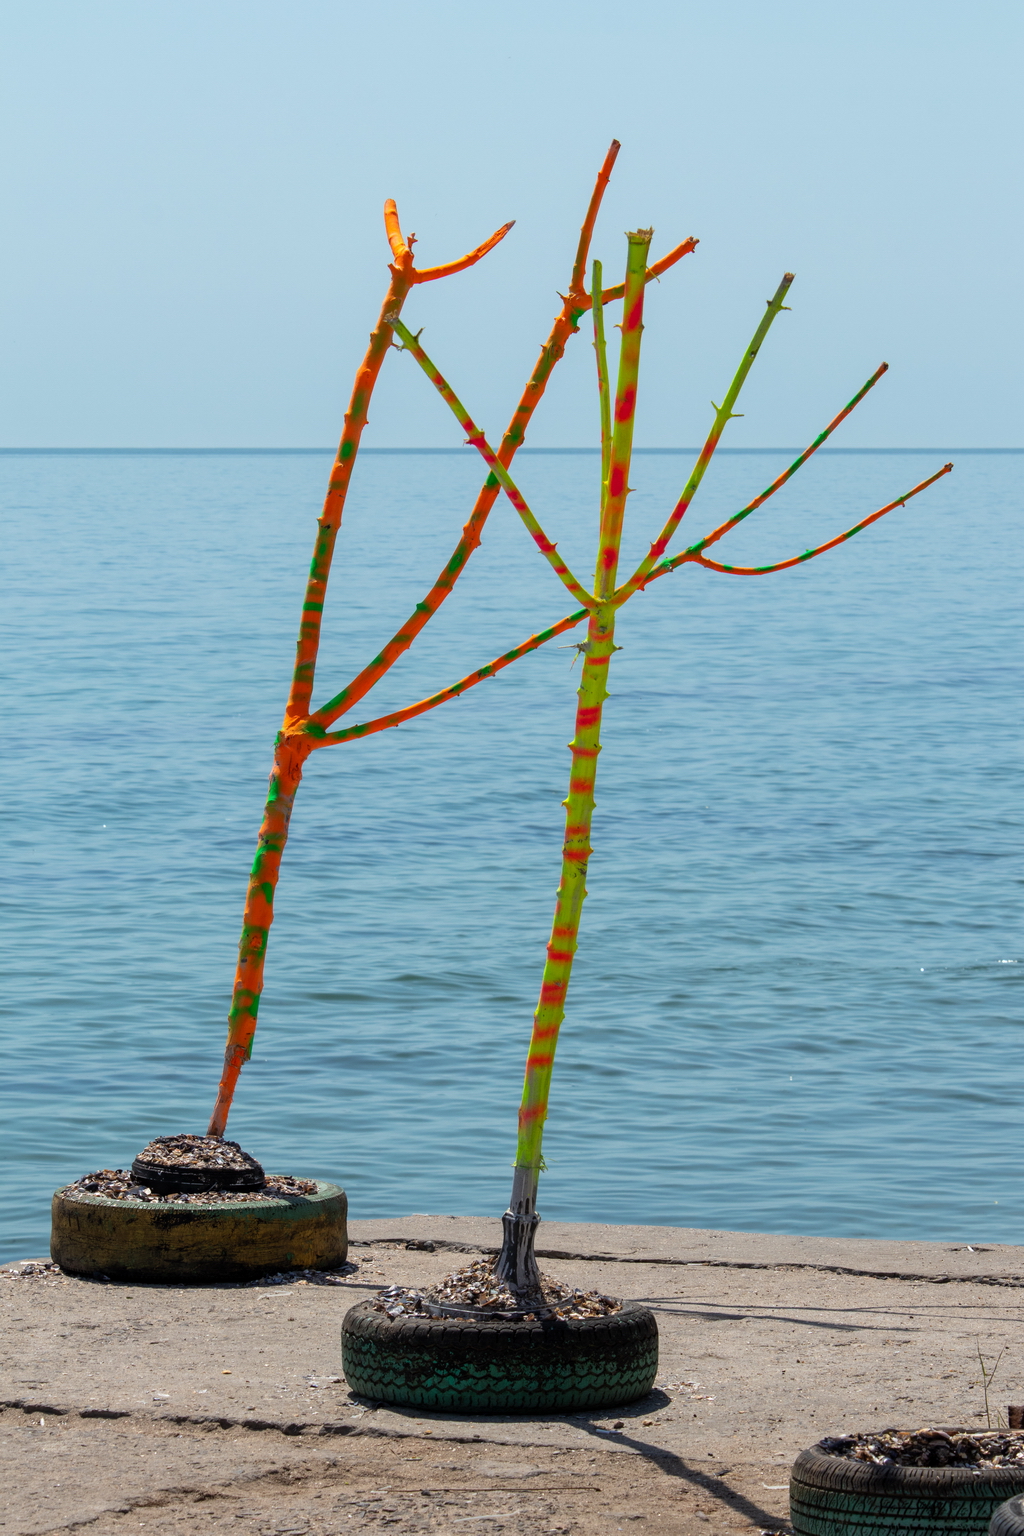 Dry trunks of young trees painted in bright colors - Ukraine, Odessa, 11,06,2020